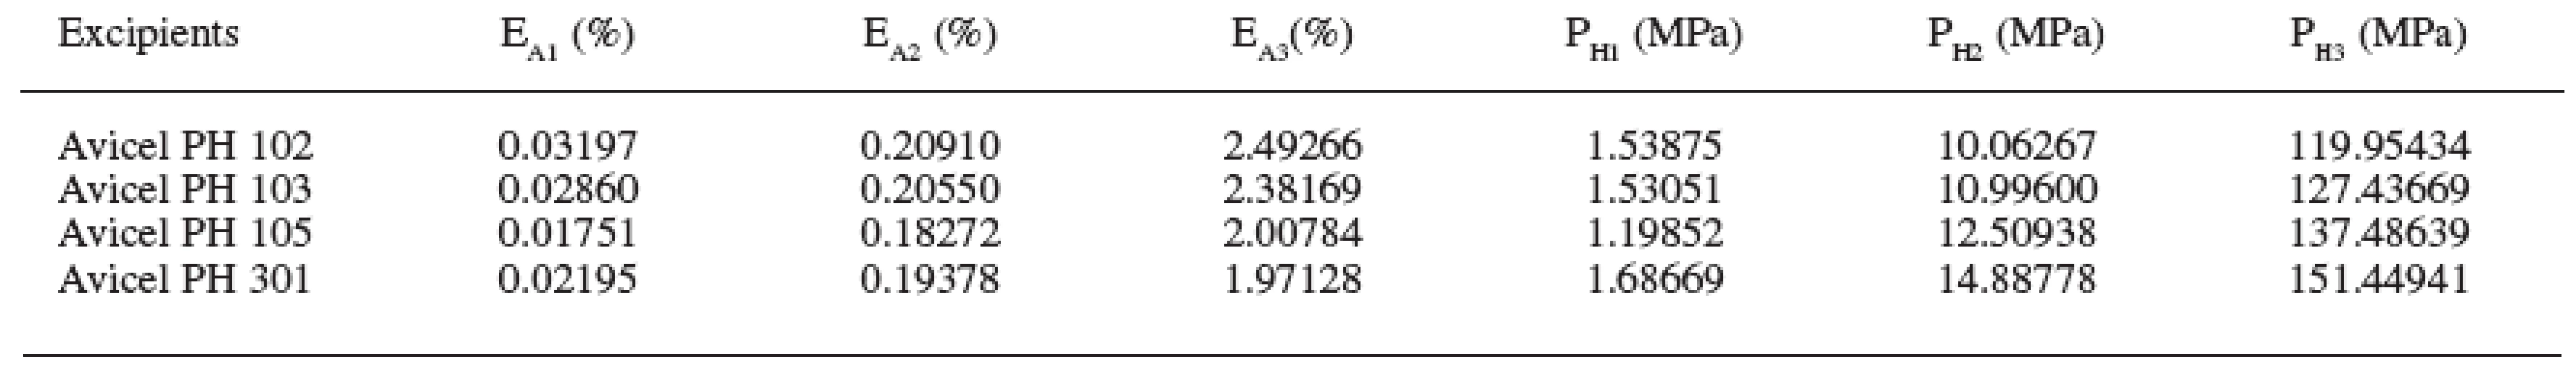 Parameters AR1-3 and E1-3 in the excipients under study (abbreviations of parameters of compression are explained in the paper)